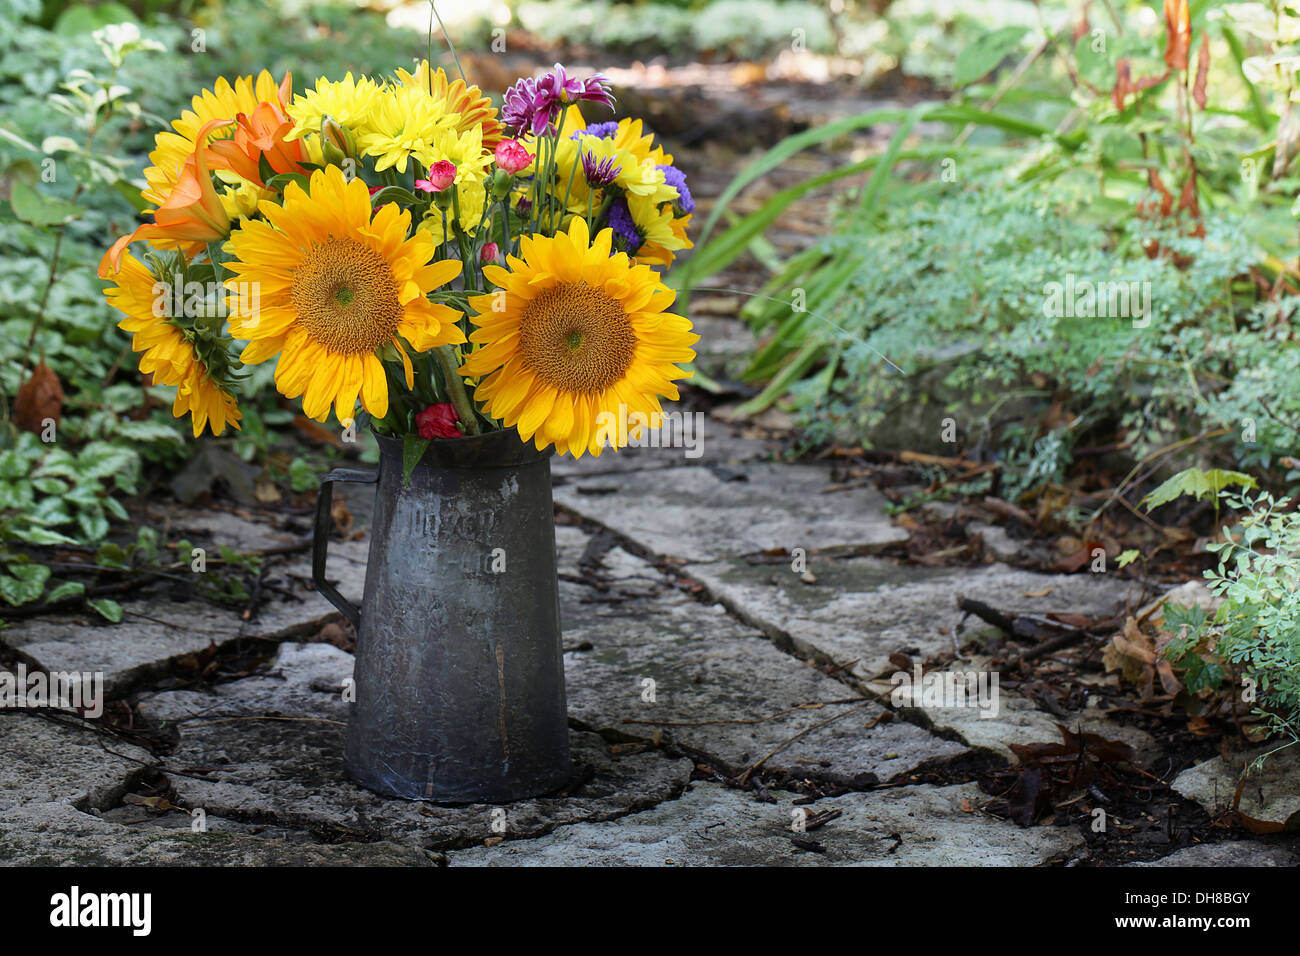 Sunflower, Helianthus annuus. A bouquet of flowers in an antique metal can in the garden. Stock Photo